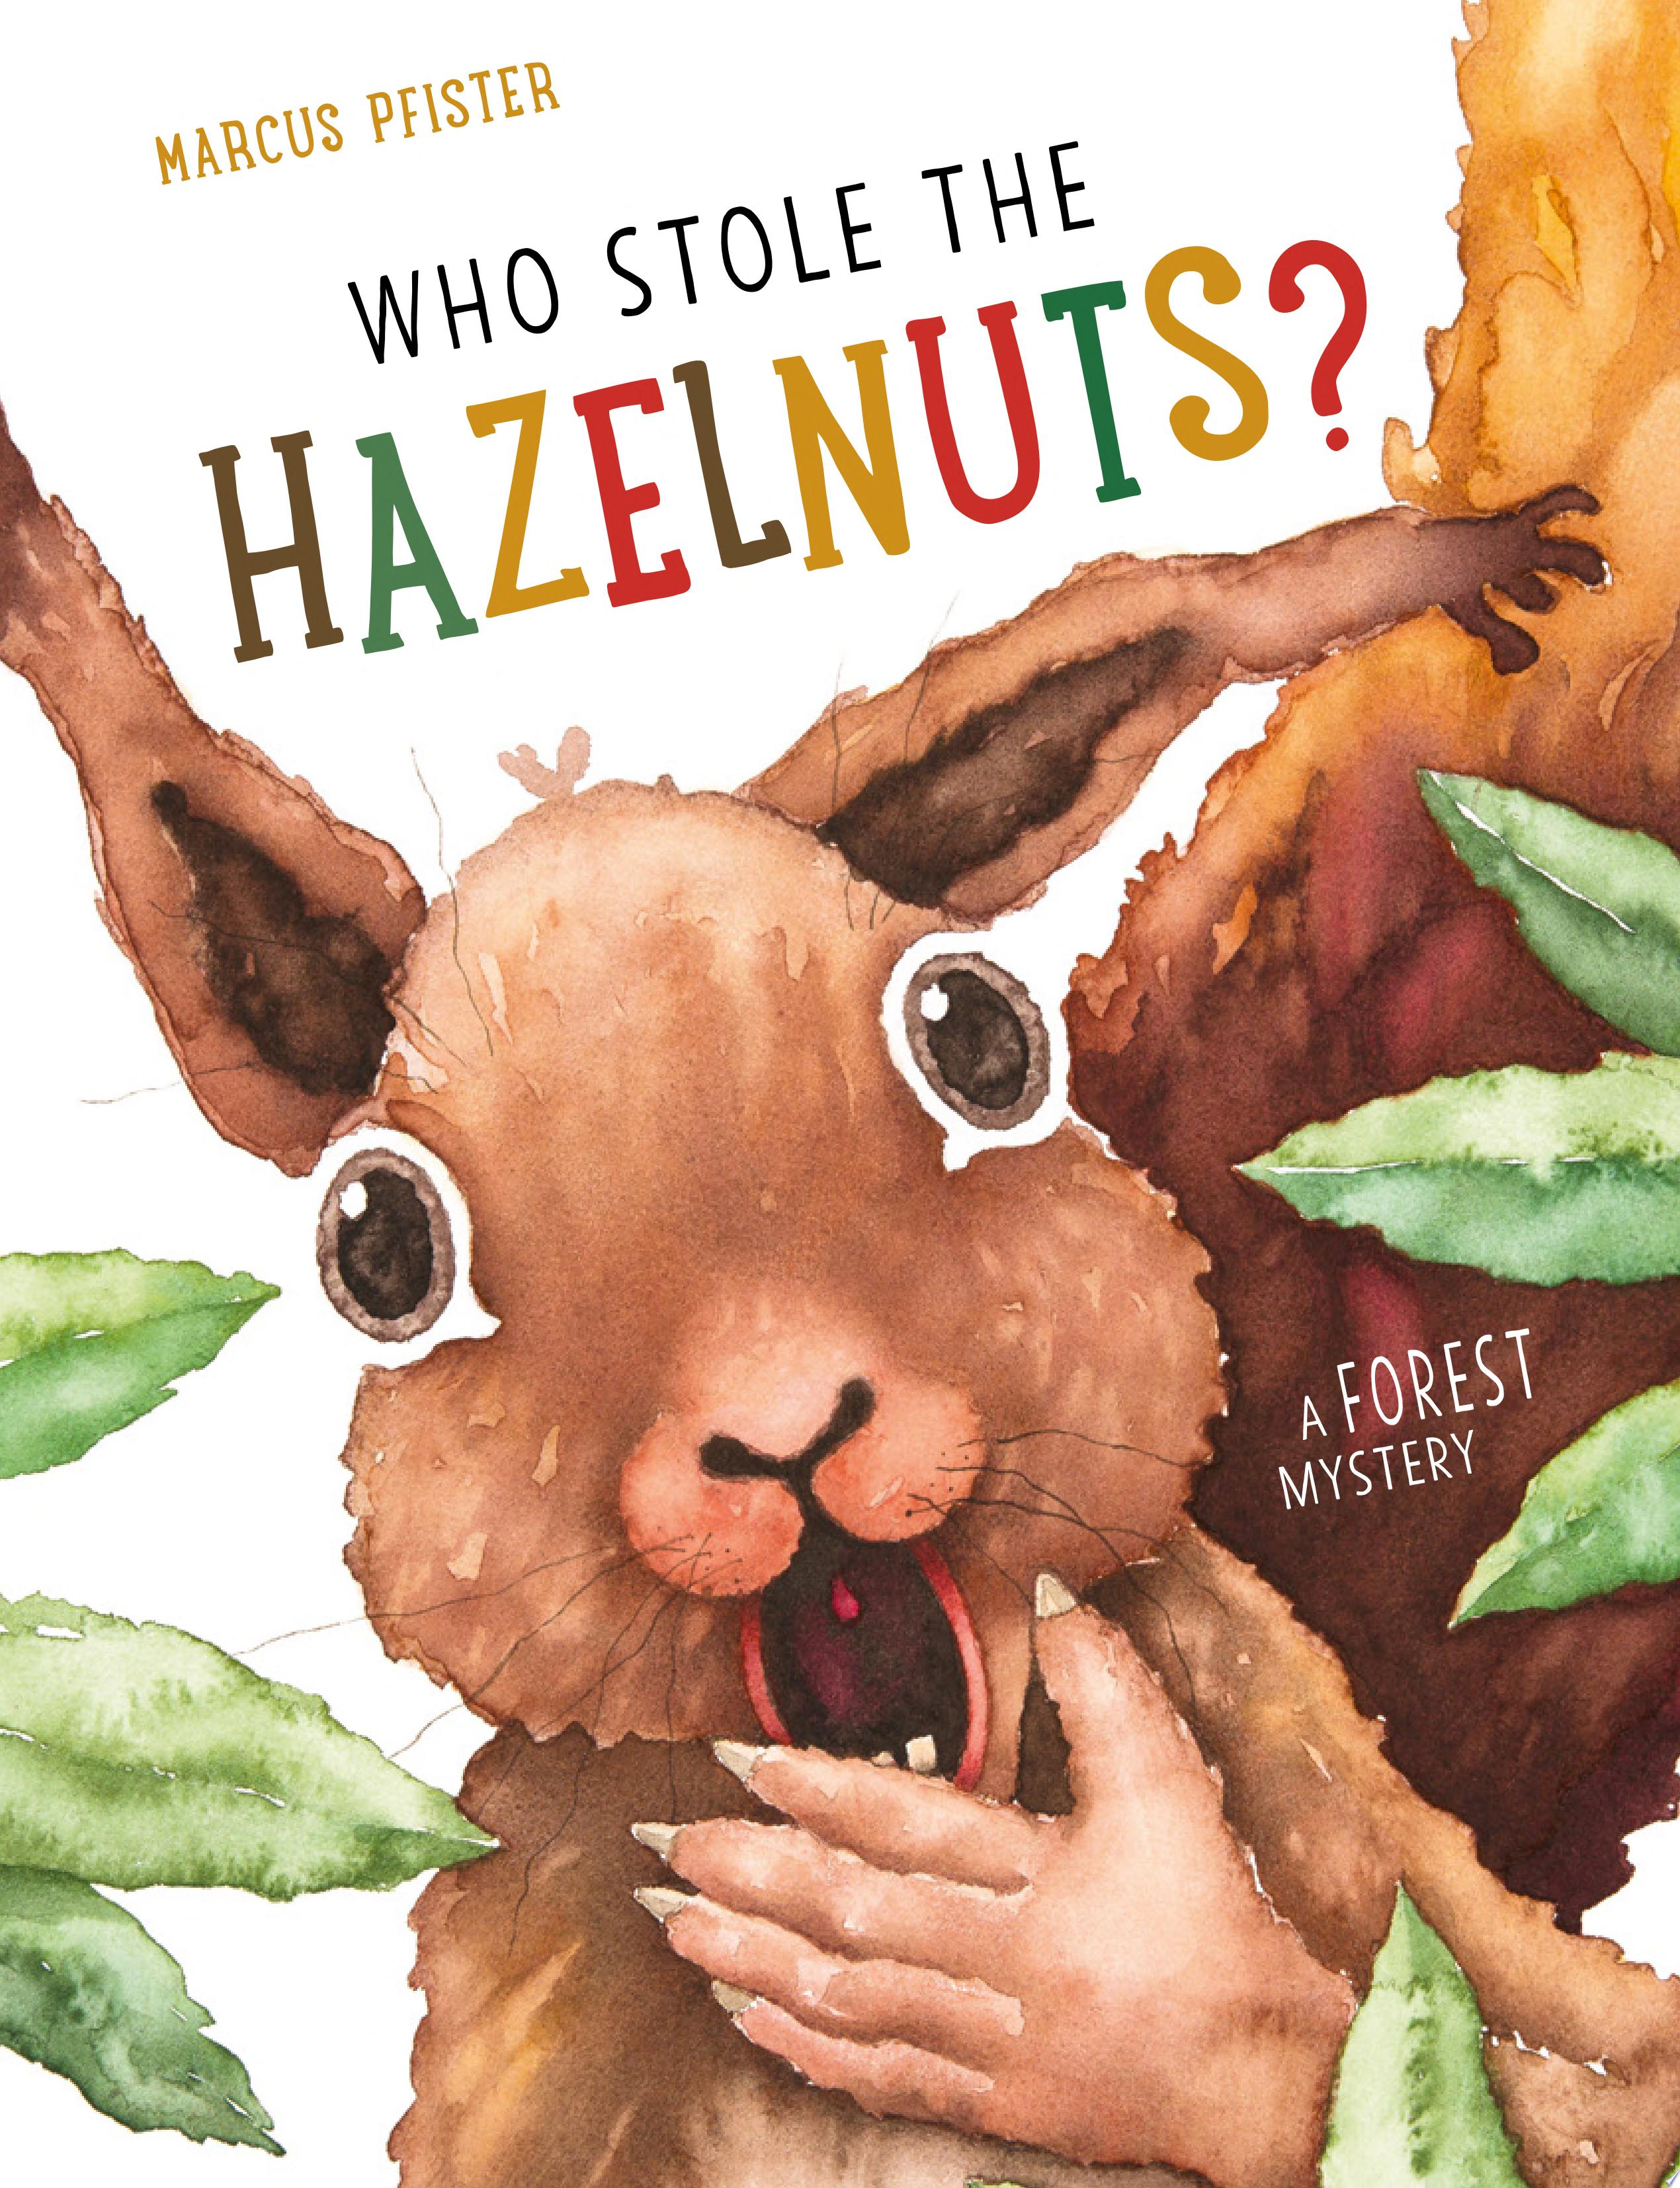 Image for "Who Stole the Hazelnuts?"